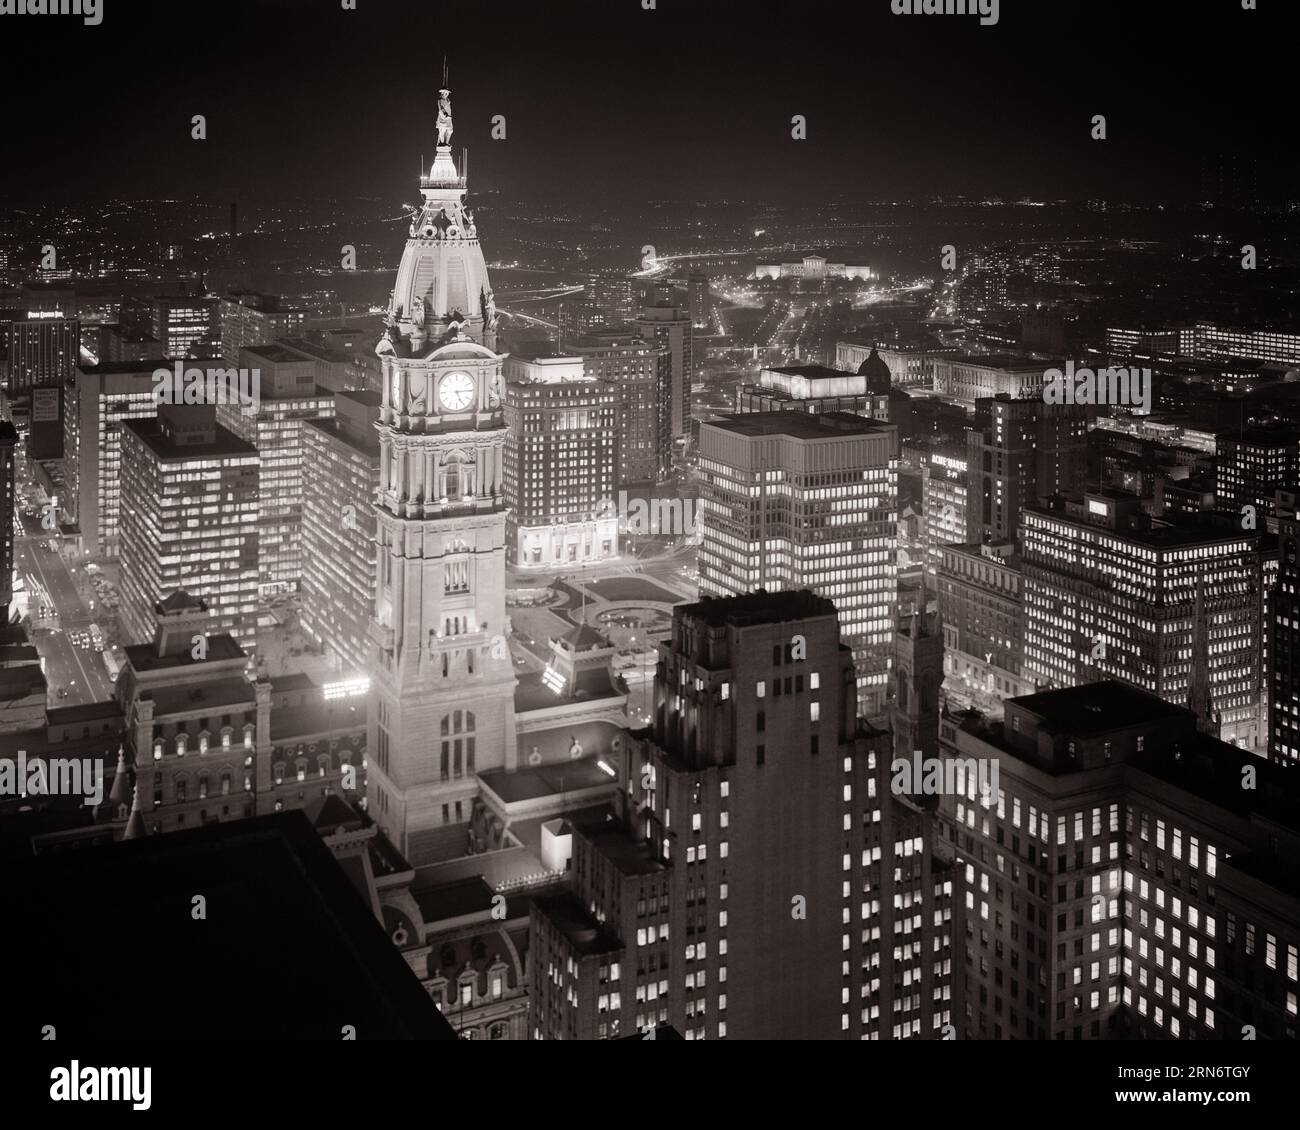 1960s NIGHT SKYLINE ILLUMINATED TOWER OF CITY HALL THE WORLD’S LARGEST FREE-STANDING GRANITE STRUCTURE PHILADELPHIA PA USA  - p7418 HAR001 HARS DREAMS STRUCTURE MARBLE CITY HALL HIGH ANGLE ADVENTURE PROPERTY EXCITEMENT EXTERIOR PA POLITICS REAL ESTATE COMMONWEALTH STRUCTURES CITIES KEYSTONE STATE MASONRY MATERIALS PRINCIPAL EDIFICE 1969 ILLUMINATED LIMESTONE NIGHTTIME AERIAL VIEW BLACK AND WHITE CITY OF BROTHERLY LOVE GRANITE HAR001 MASSIVE MAYOR OLD FASHIONED WILLIAM PENN Stock Photo